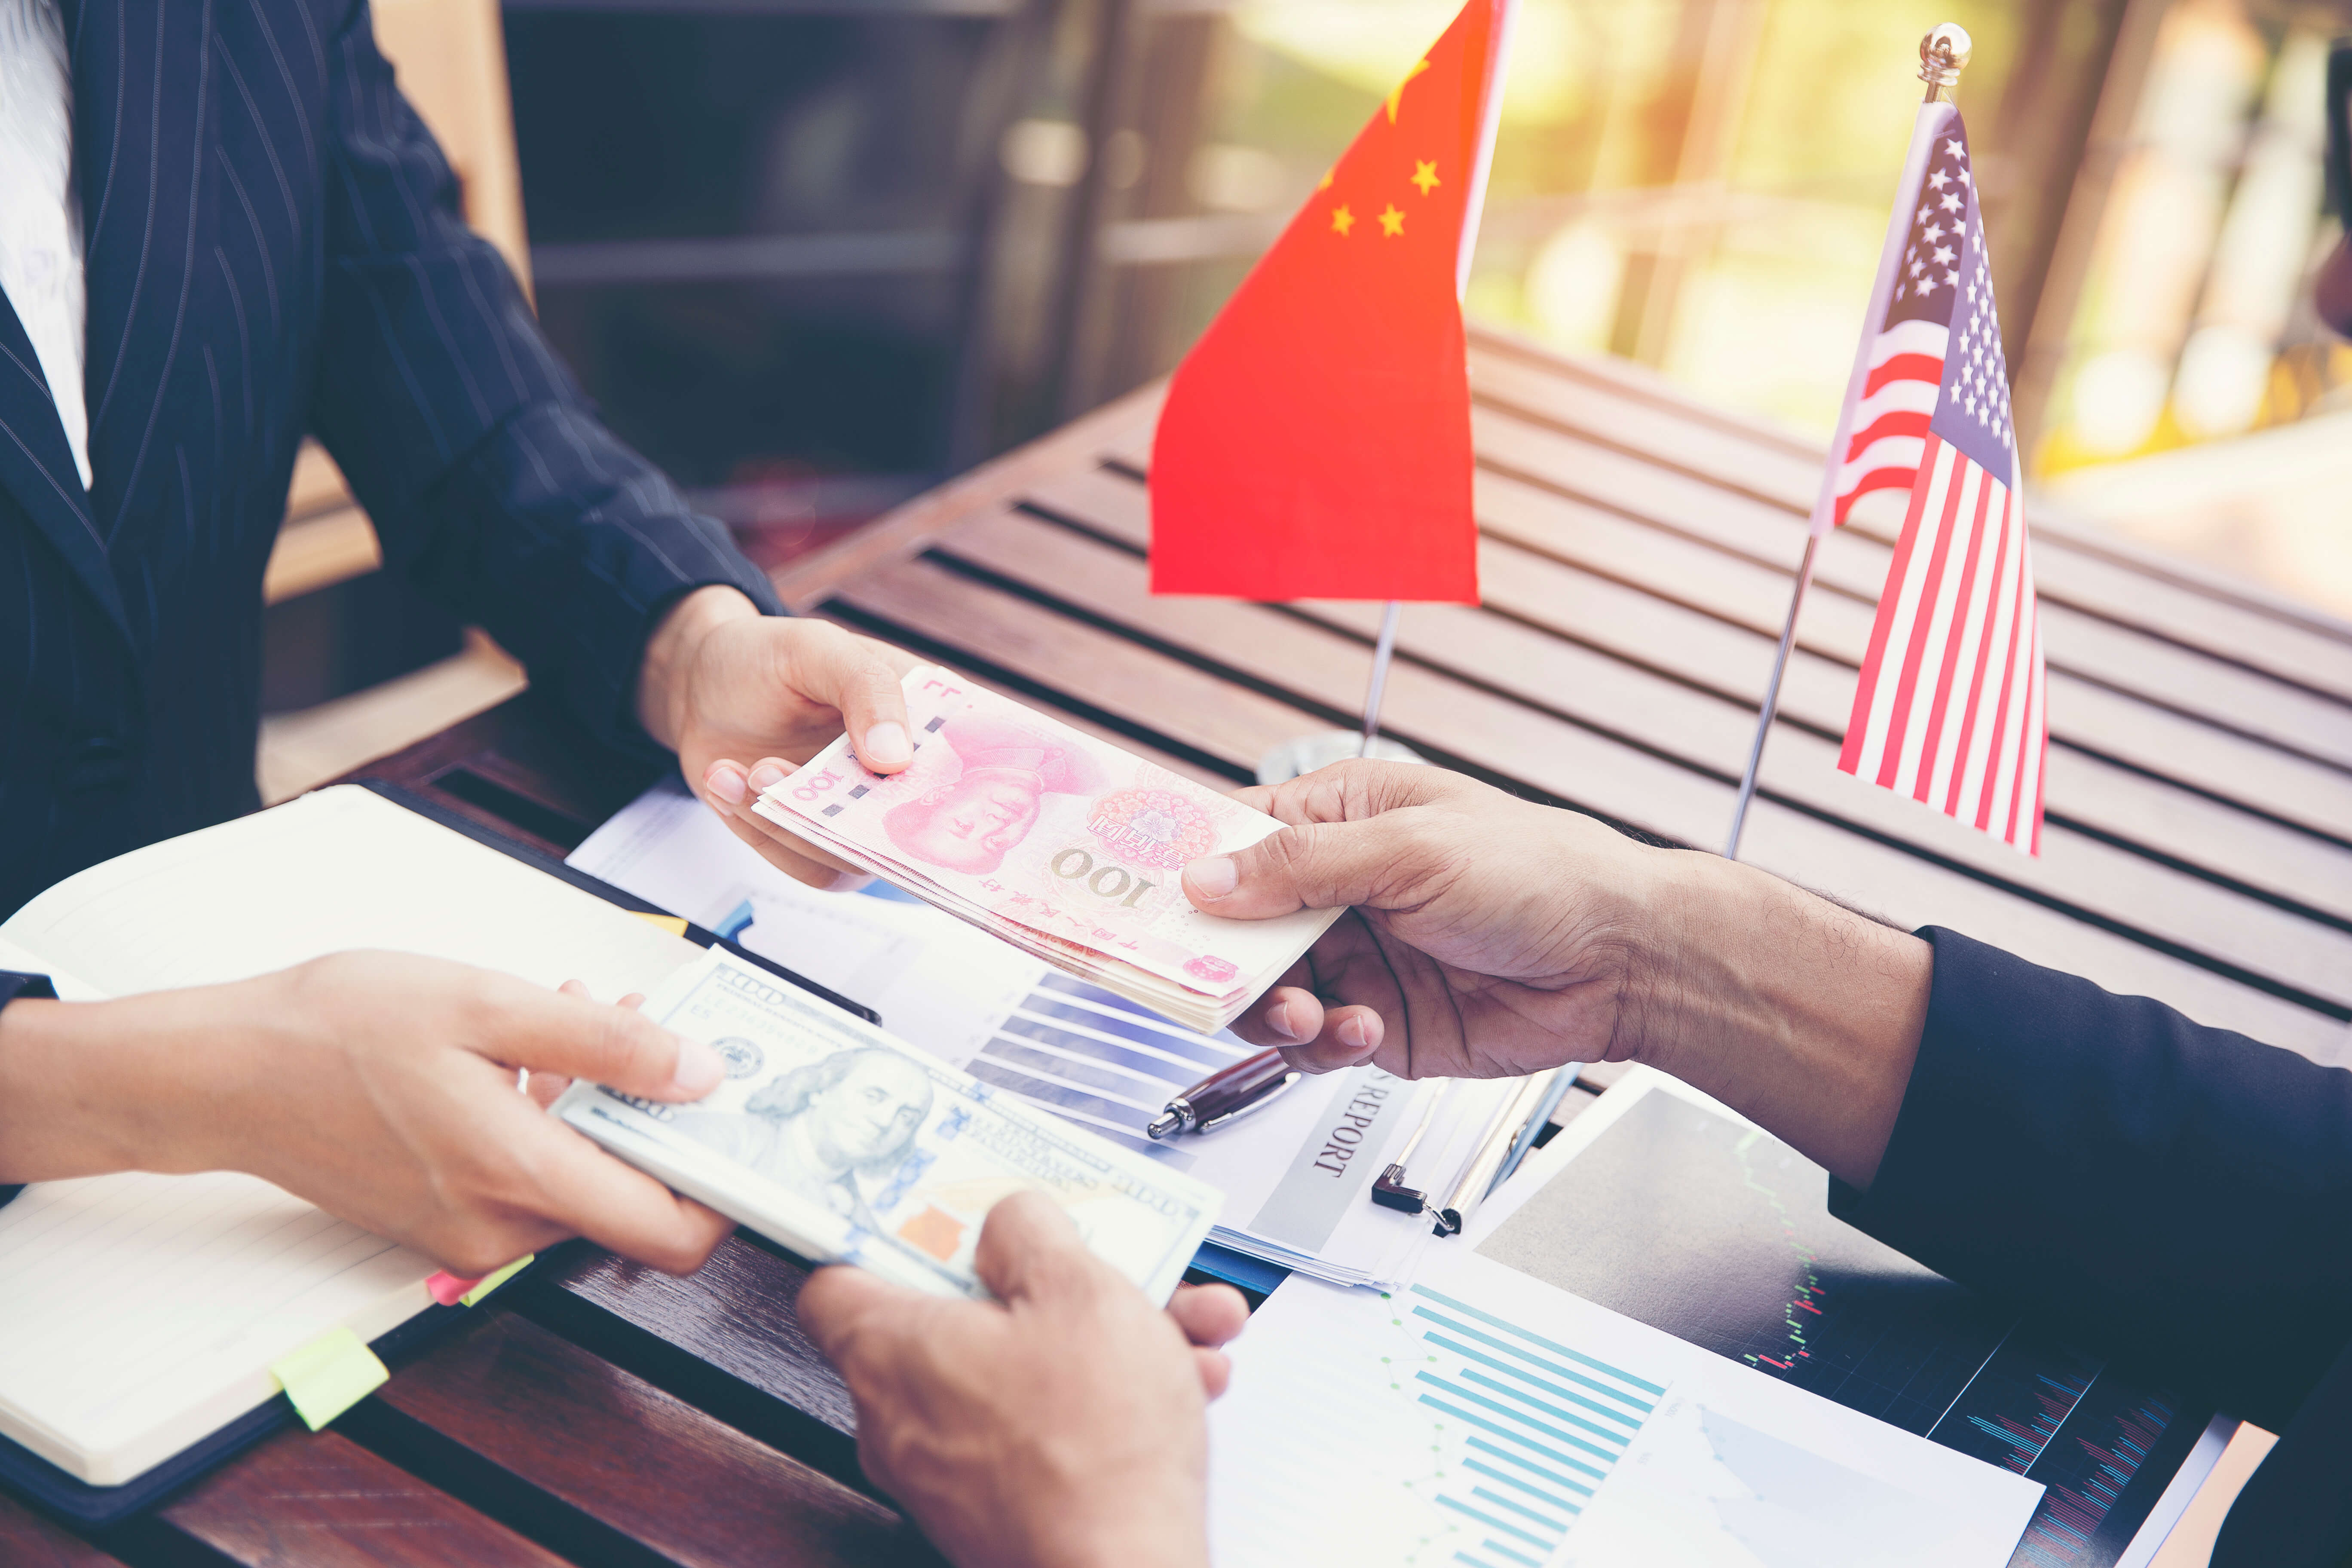 FinanceBrokerage – Economic News: China's countermeasure would target specific measures the U.S. imposes.